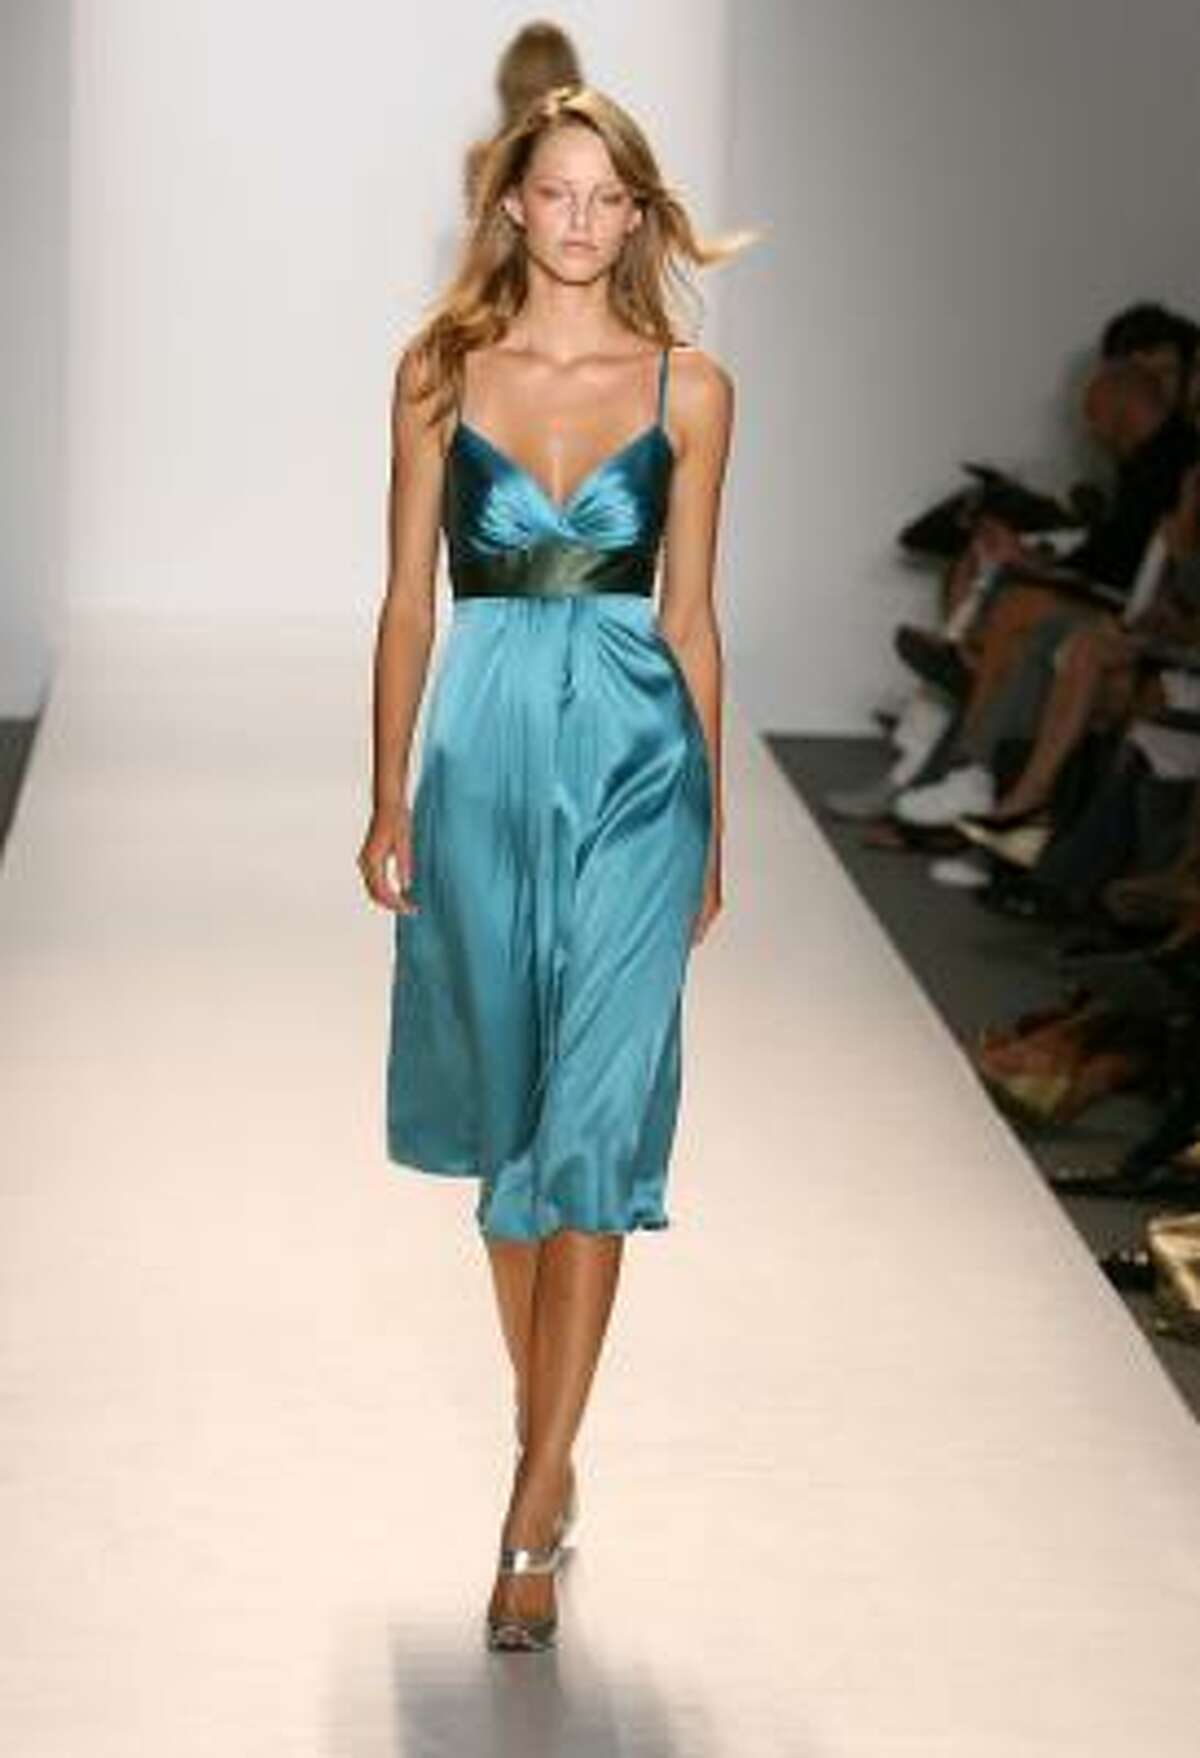 For spring, Chaiken showed this delicate, yet bold slip dress at New York's recent fashion week.